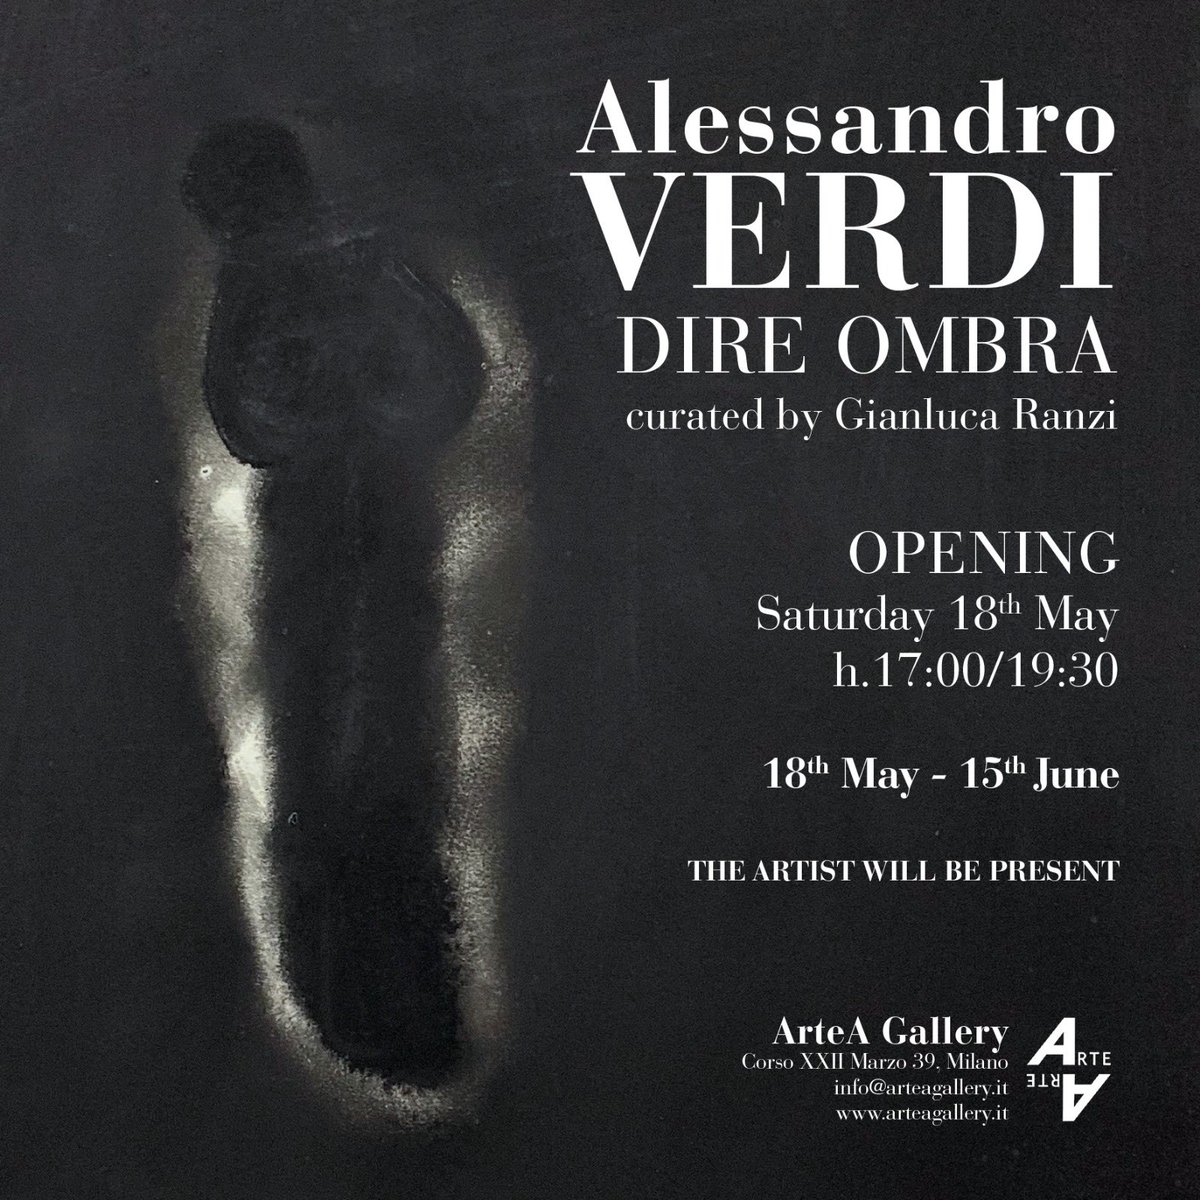 ALESSANDRO VERDI
Dire Ombra
curated by Gianluca Ranzi
Saturday 18th May 
opening at 17pm
The artist will be present 
DO NOT TO BE MISSED!!!
#arteagallerymilano #fondazionemudima #AlessandroVerdi #milanomostre